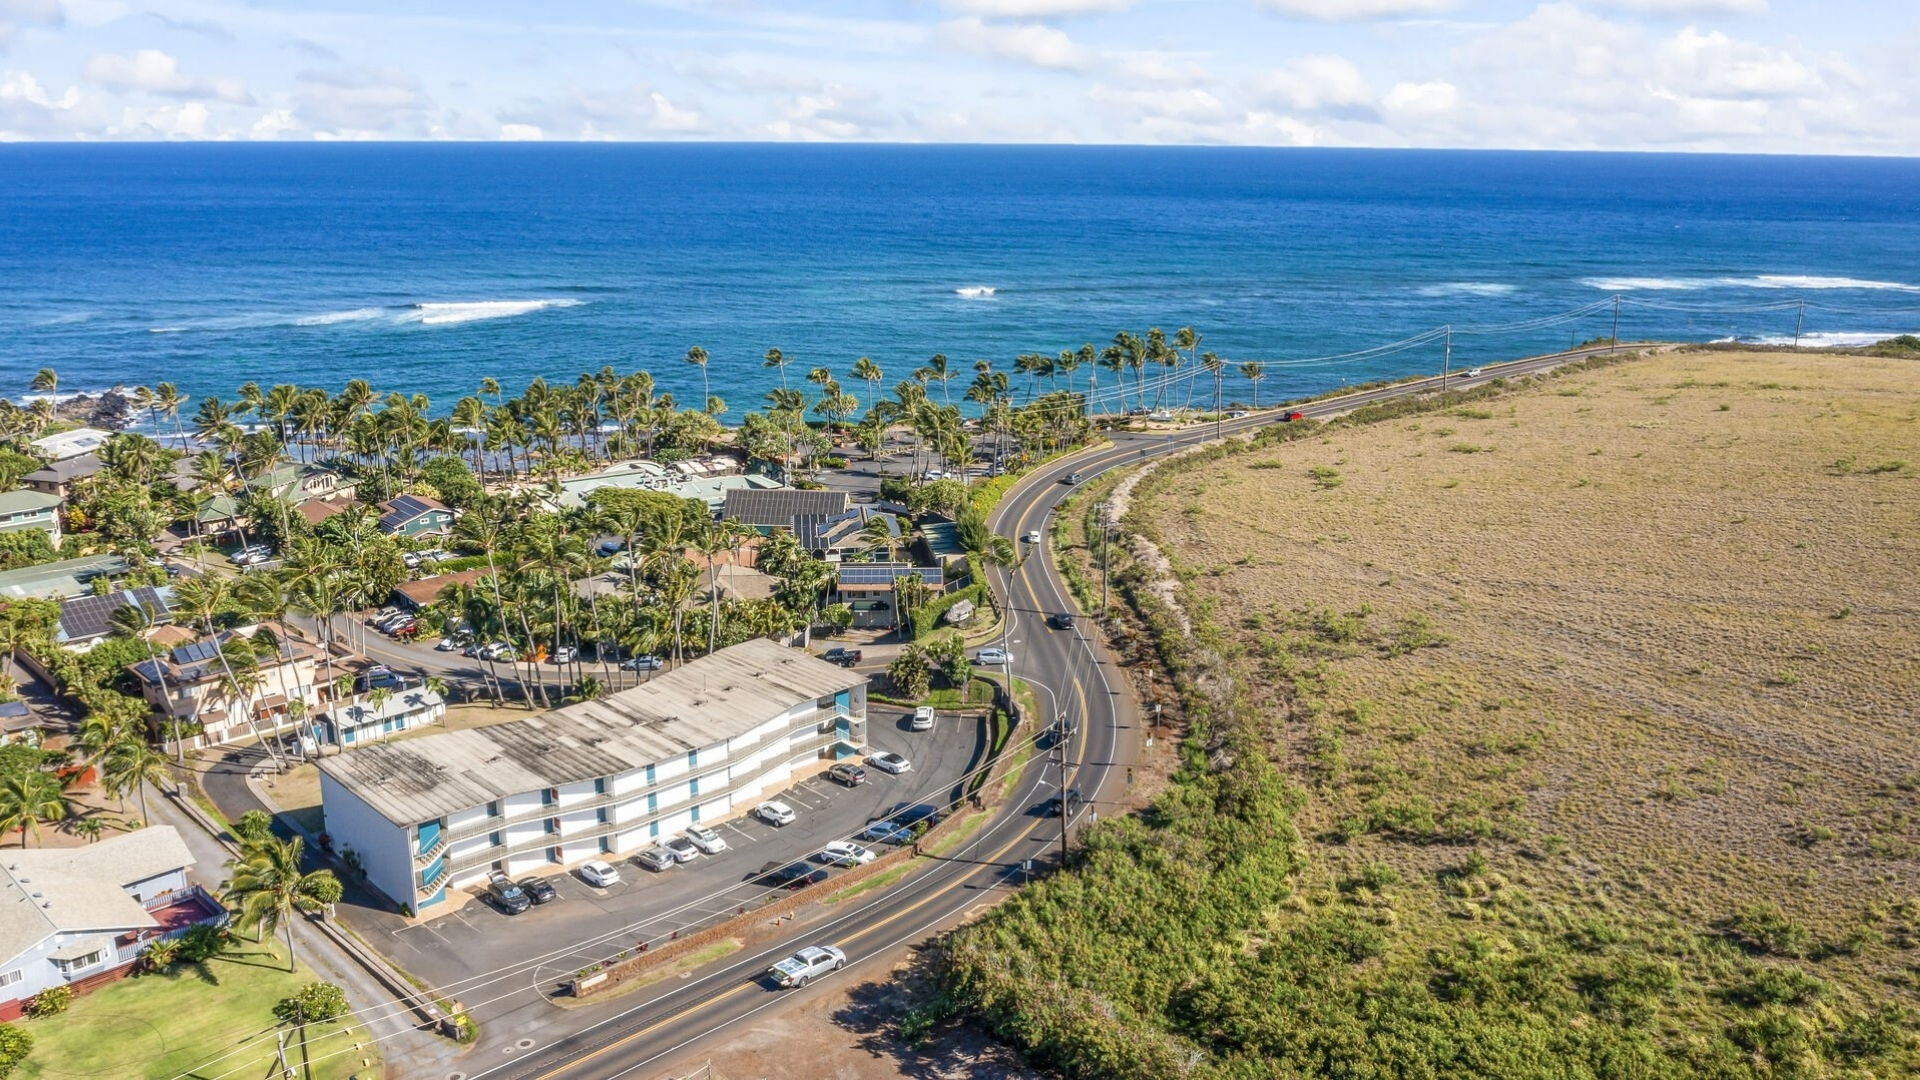 Places to Stay in North Shore Maui - Kuau Plaza Paia